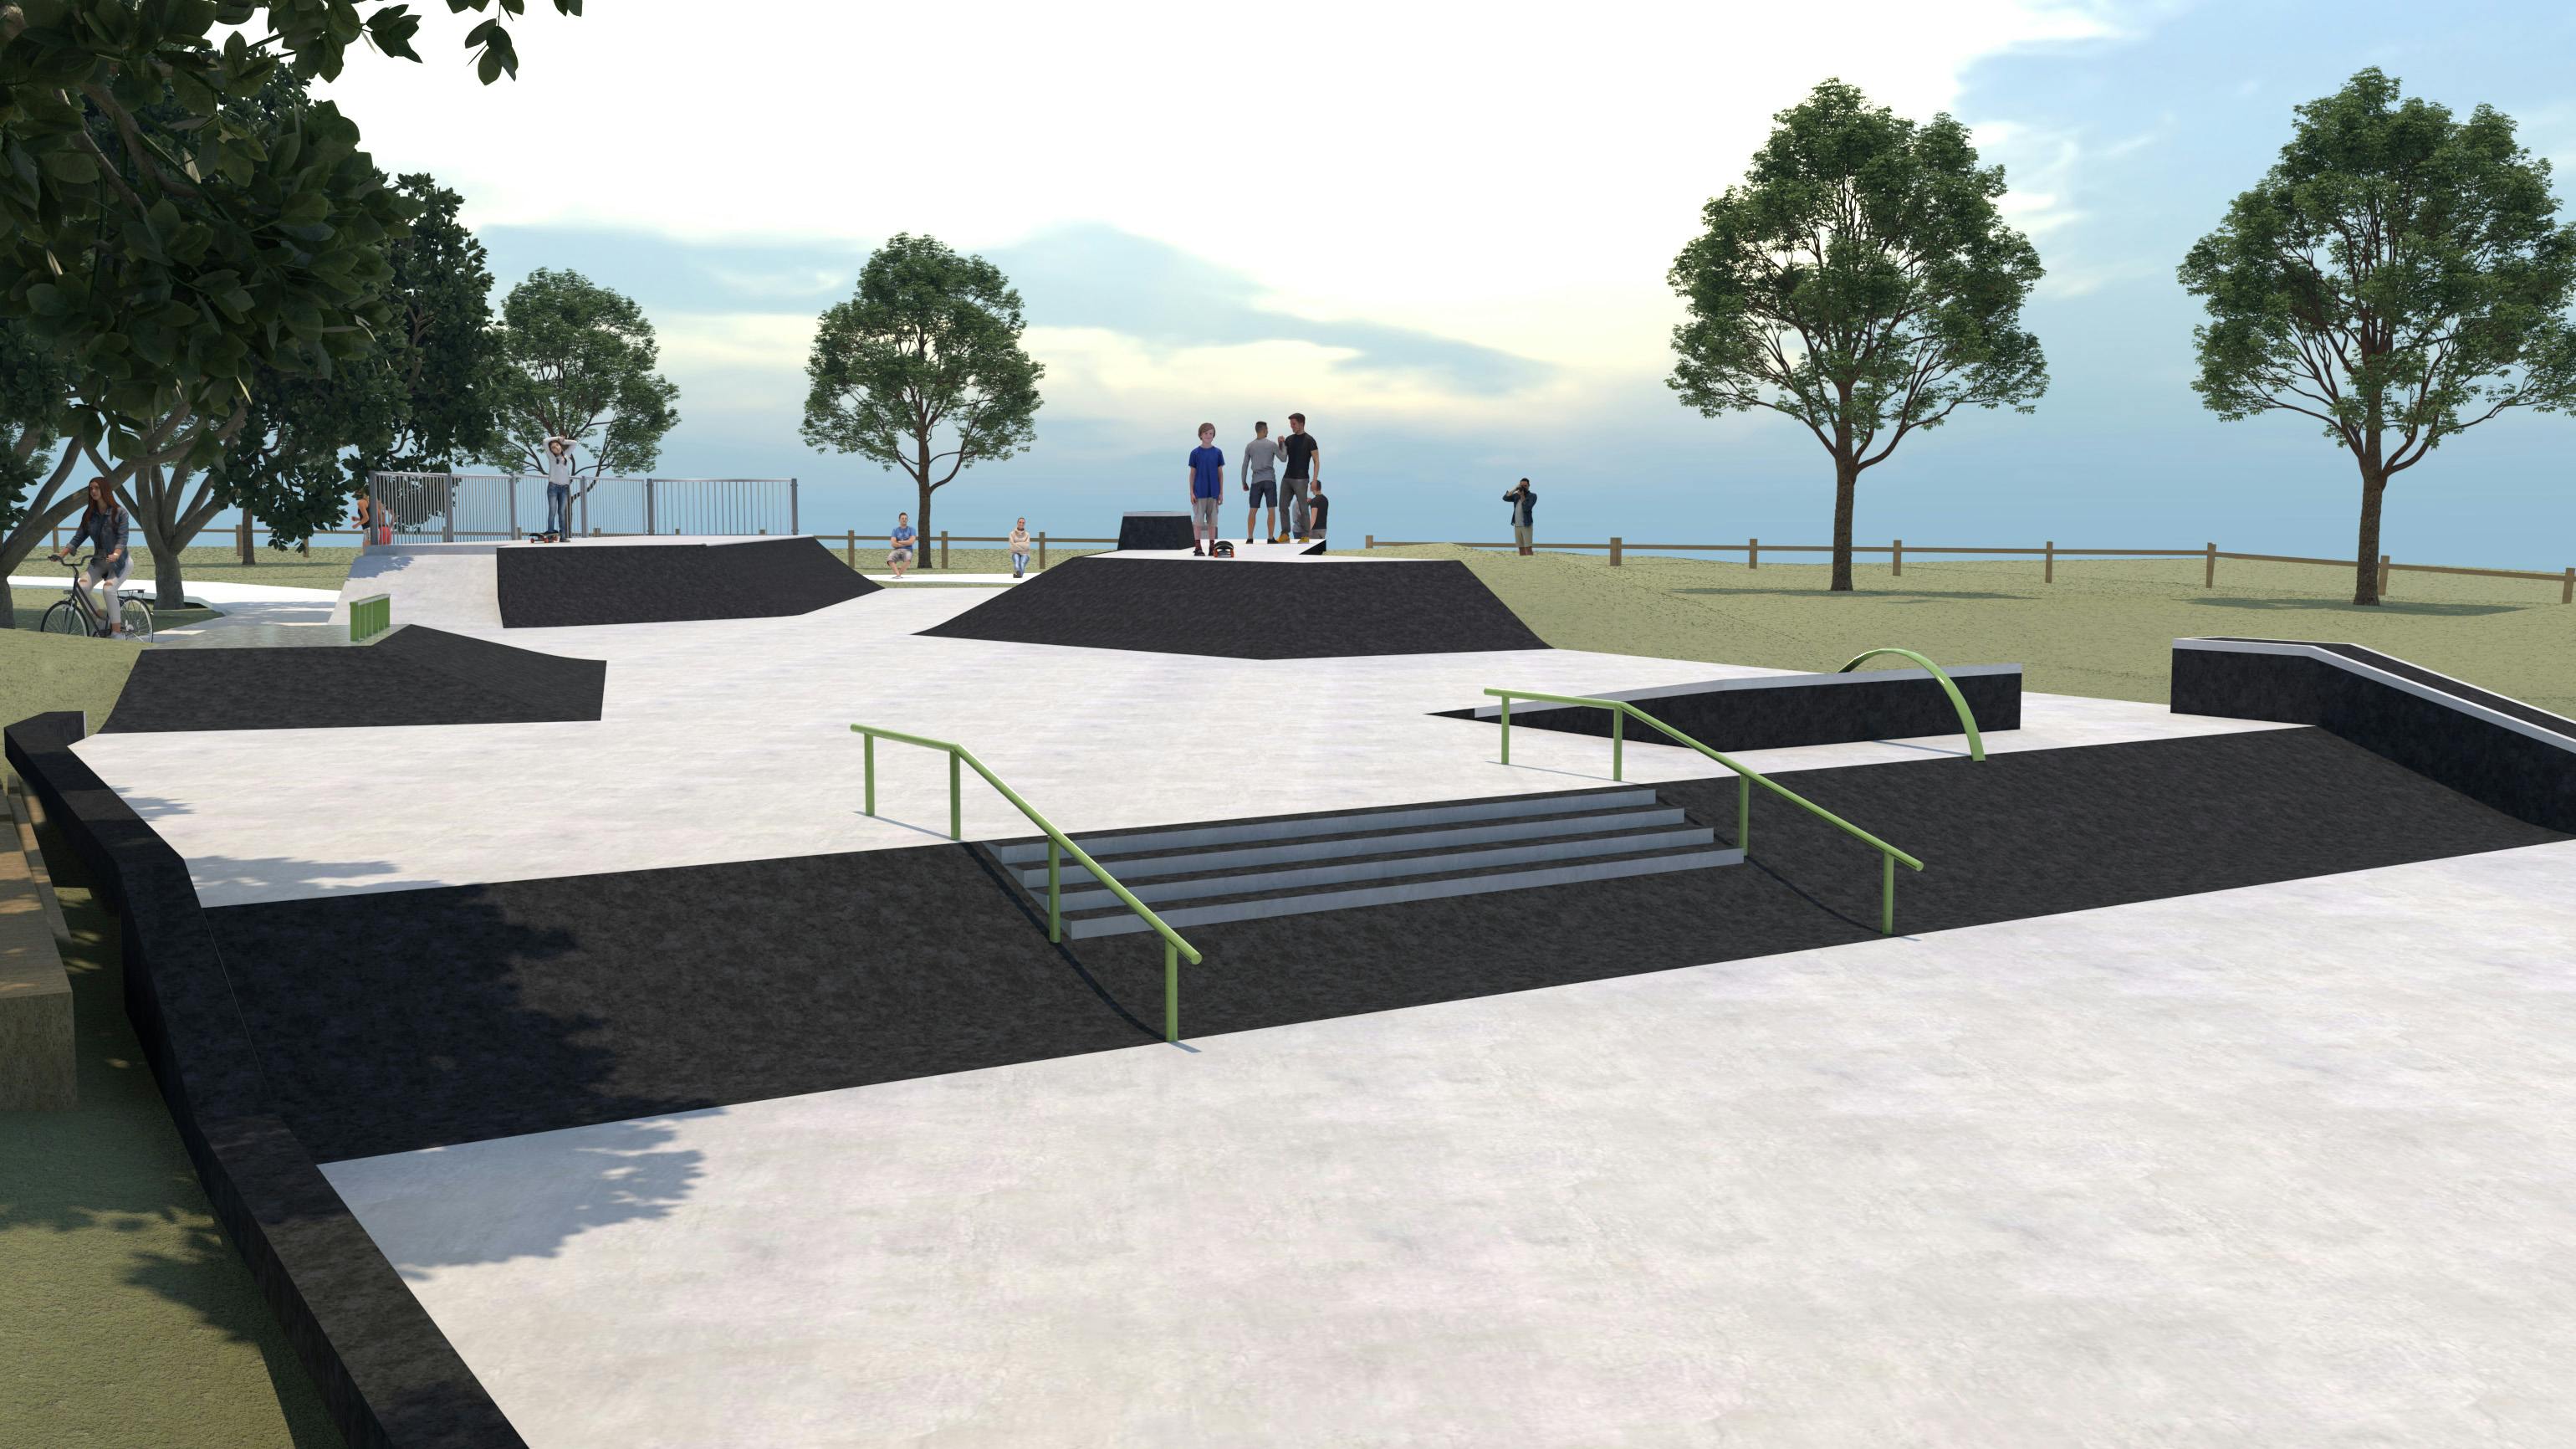 Render of proposed new skateable elements at Booker Place Park